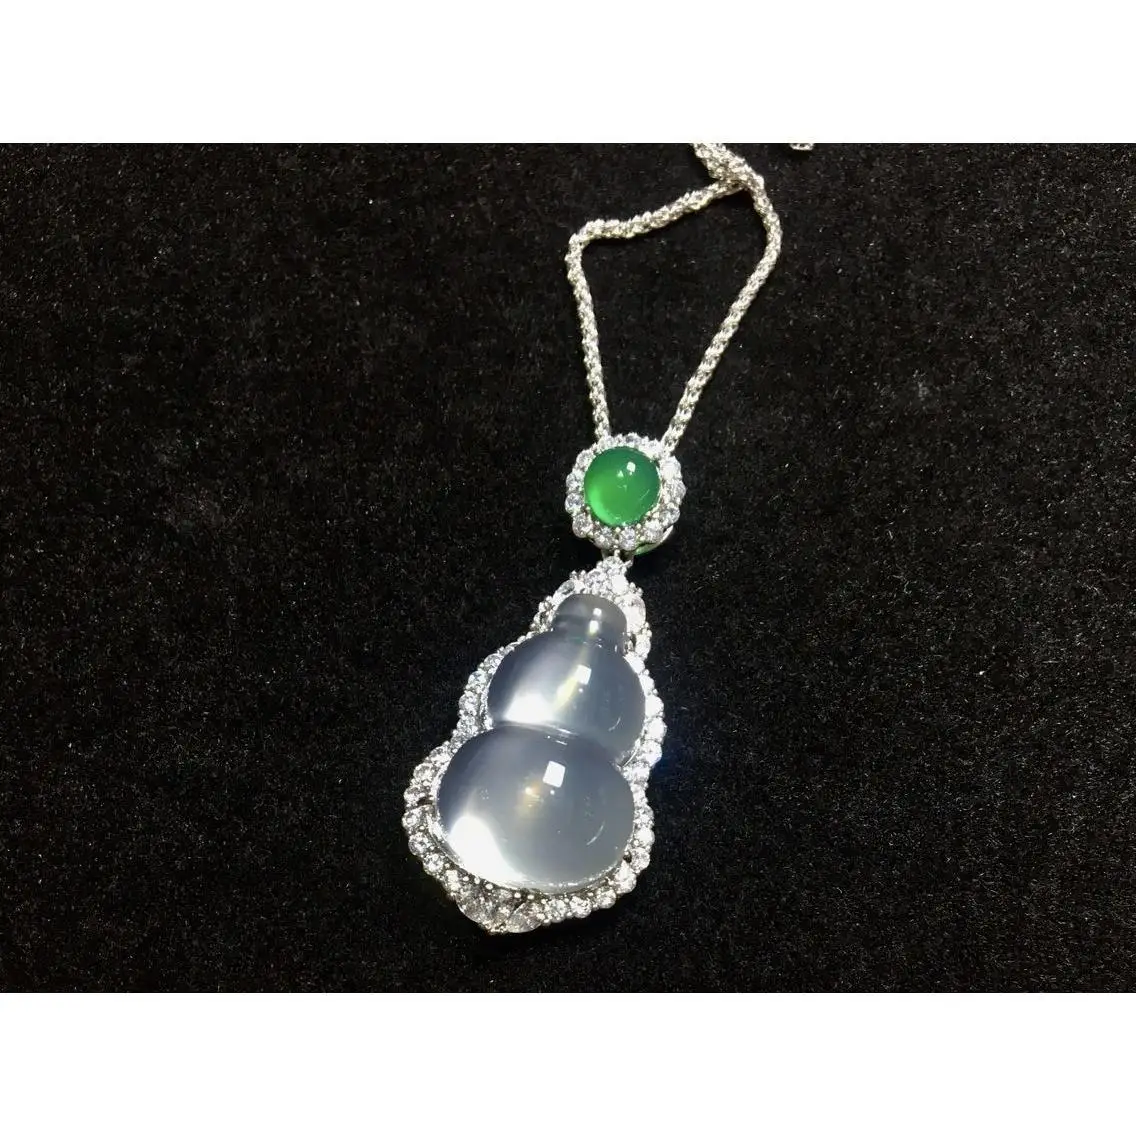 Natural High Ice White Chalcedony Agate Gourd Pendant Necklace Sweater Chain S925 Sterling Silver Inlaid Healing Crystals images - 6